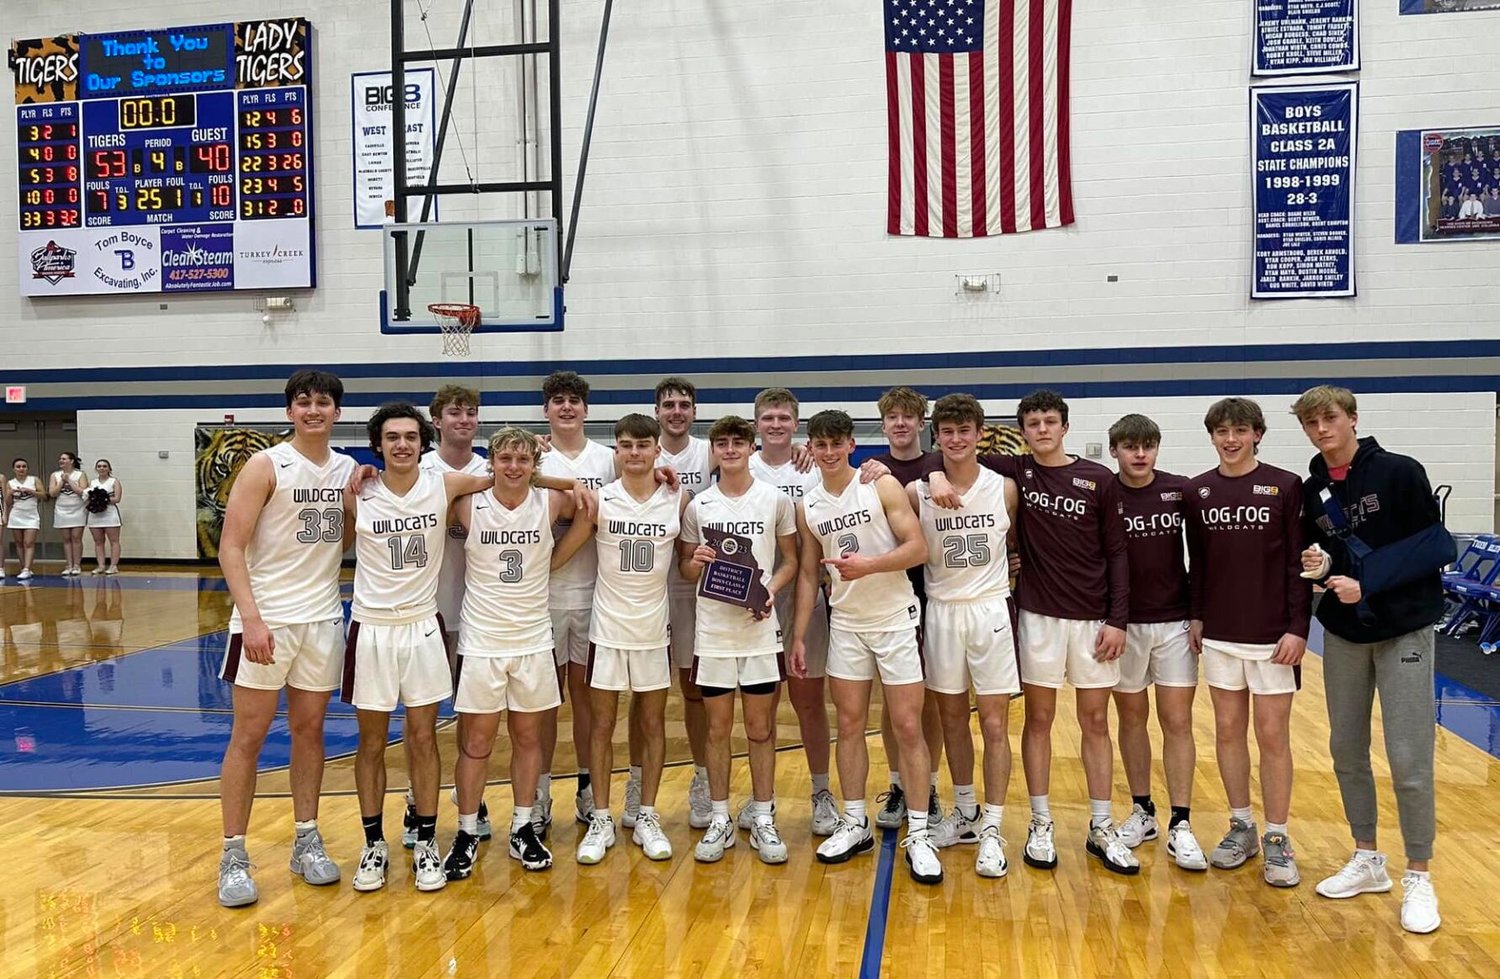 Pictured here are Logan-Rogersville Wildcat District Champions! Winning against Hollister with a final score of 53-40 on Mar. 3. The team is now heading to State. Way to go, Wildcats!


Contributed Photo by John Schaefer.